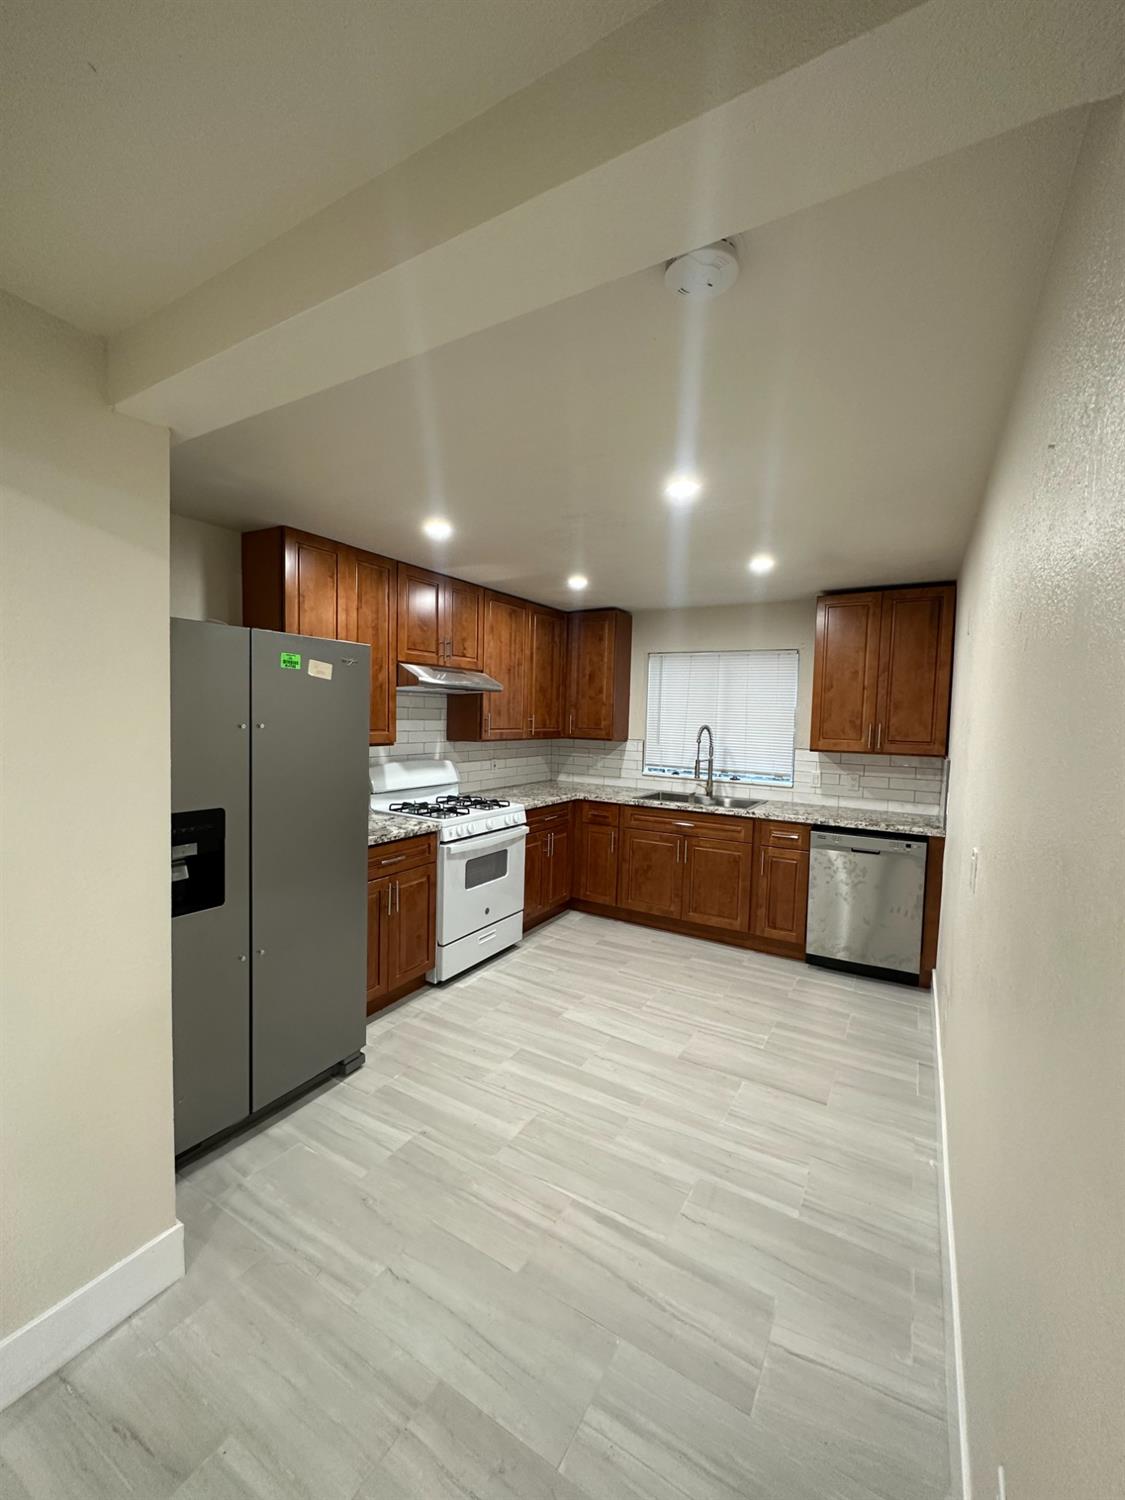 a large kitchen with stainless steel appliances kitchen island a large counter top oven and cabinets